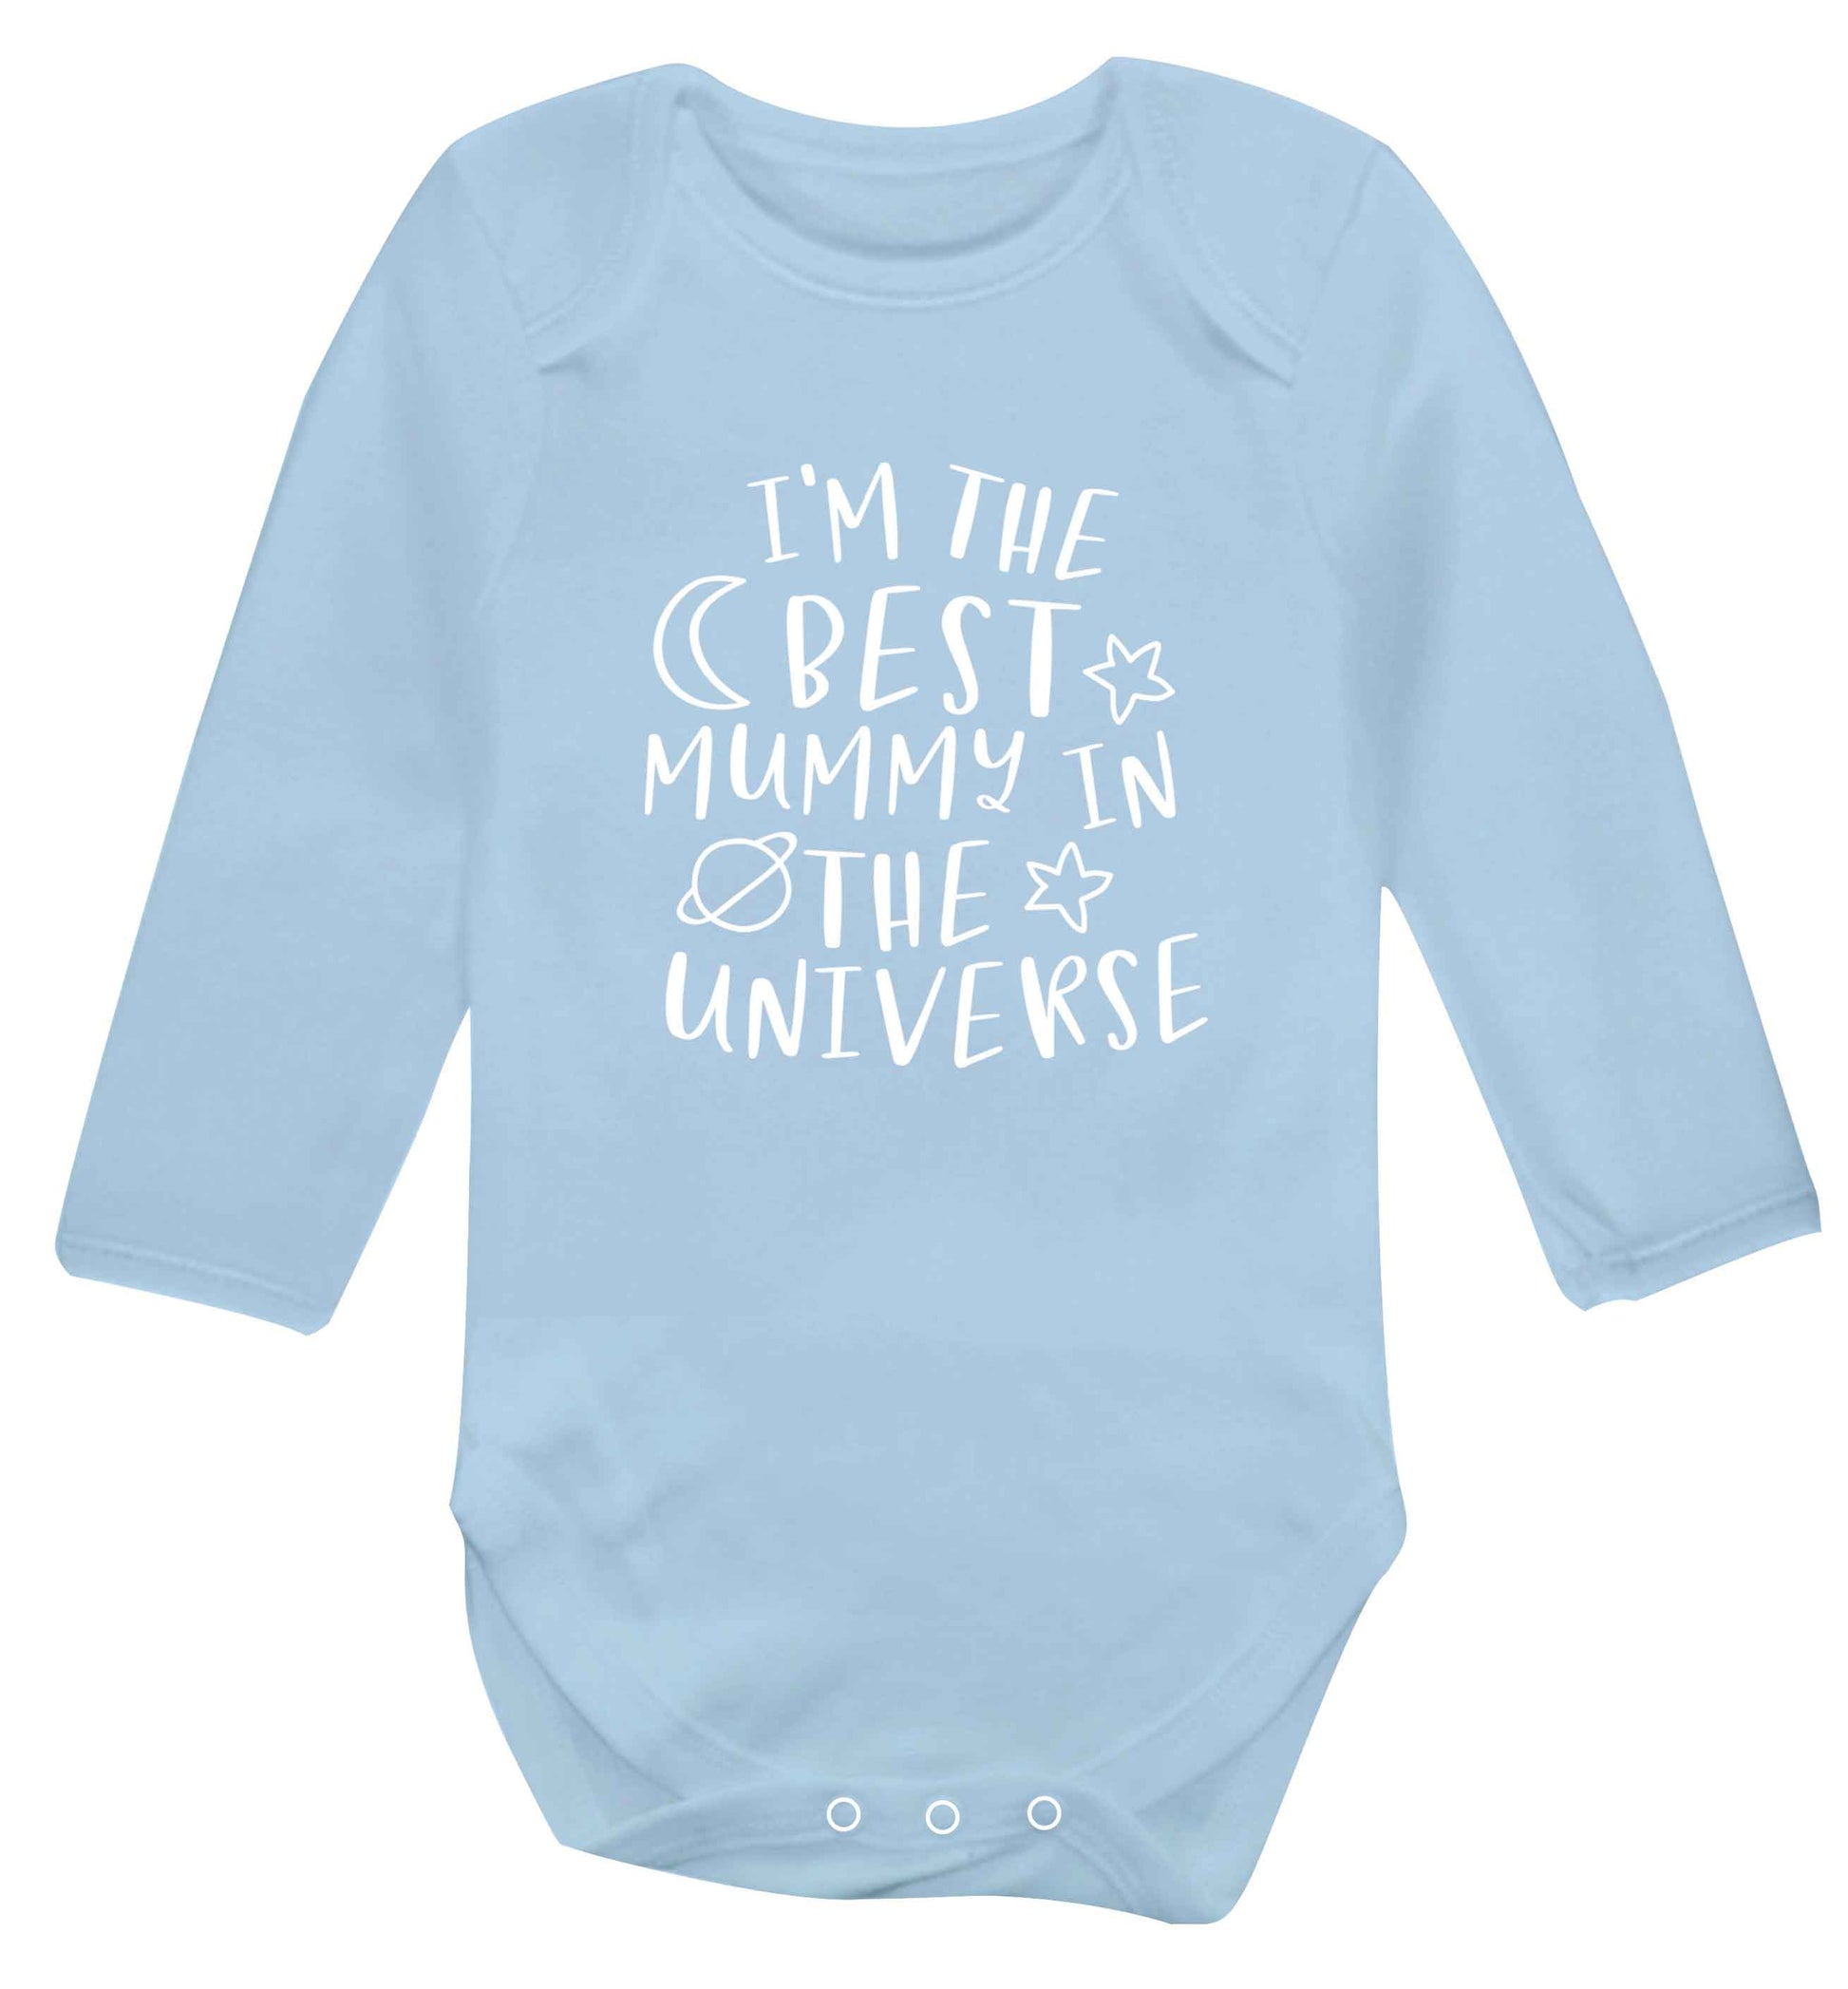 I'm the best mummy in the universe baby vest long sleeved pale blue 6-12 months